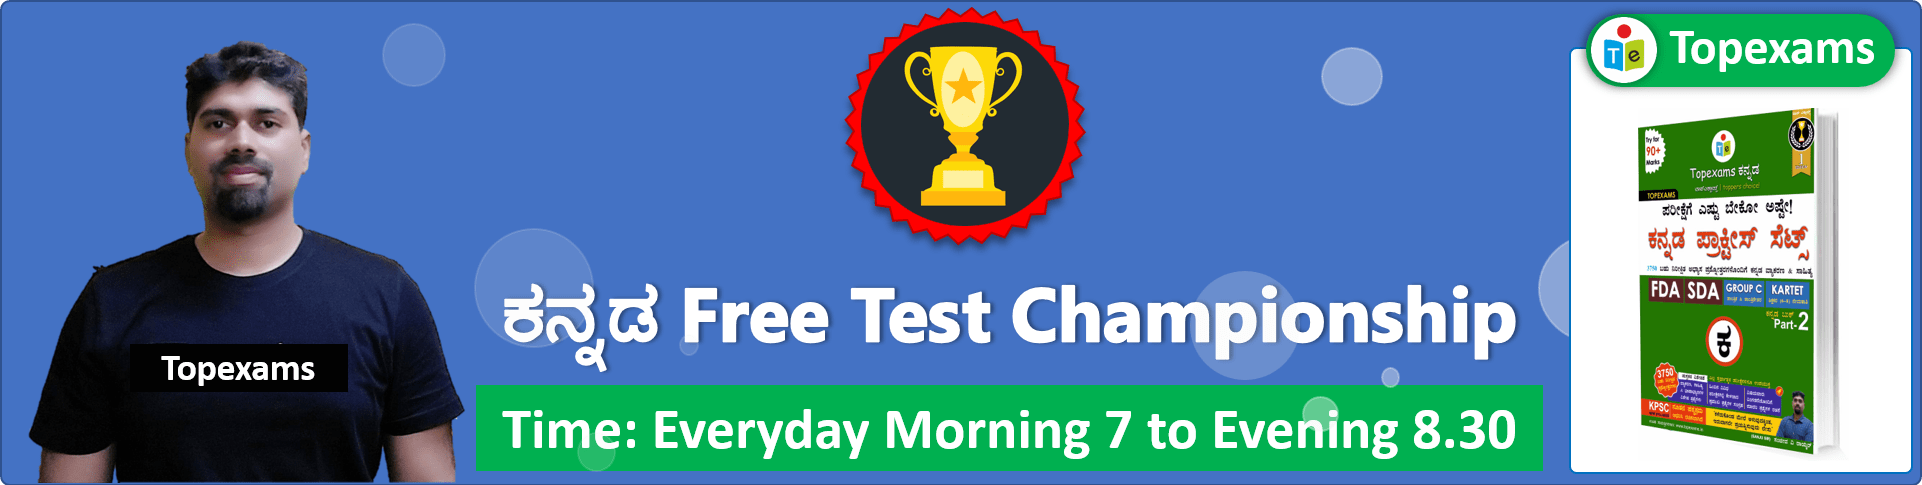 You are currently viewing Test-10 ಕನ್ನಡ Championship  For SDA, FDA, Group C, KARTET